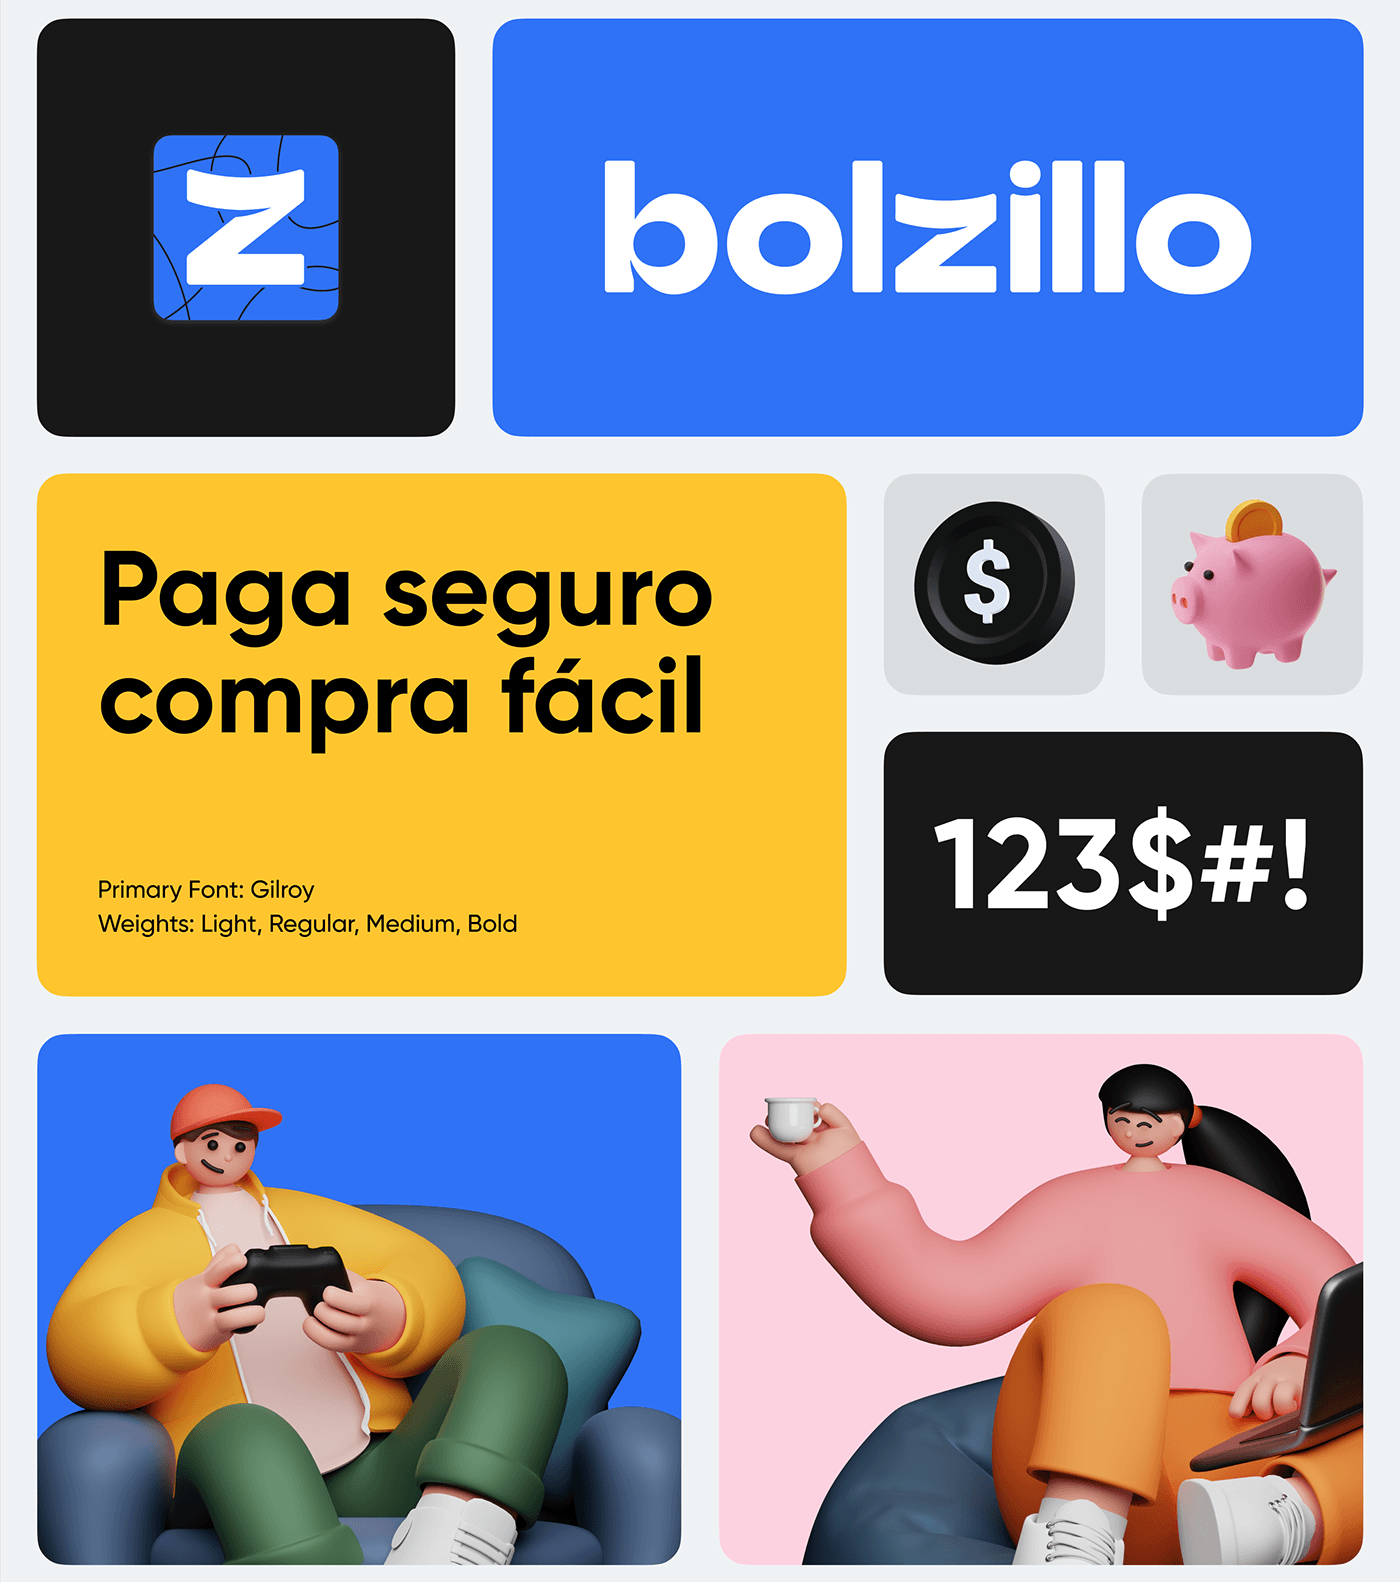 Bolzillo brand assets: symbol, wordmark, typeface, and 3D illustrations.